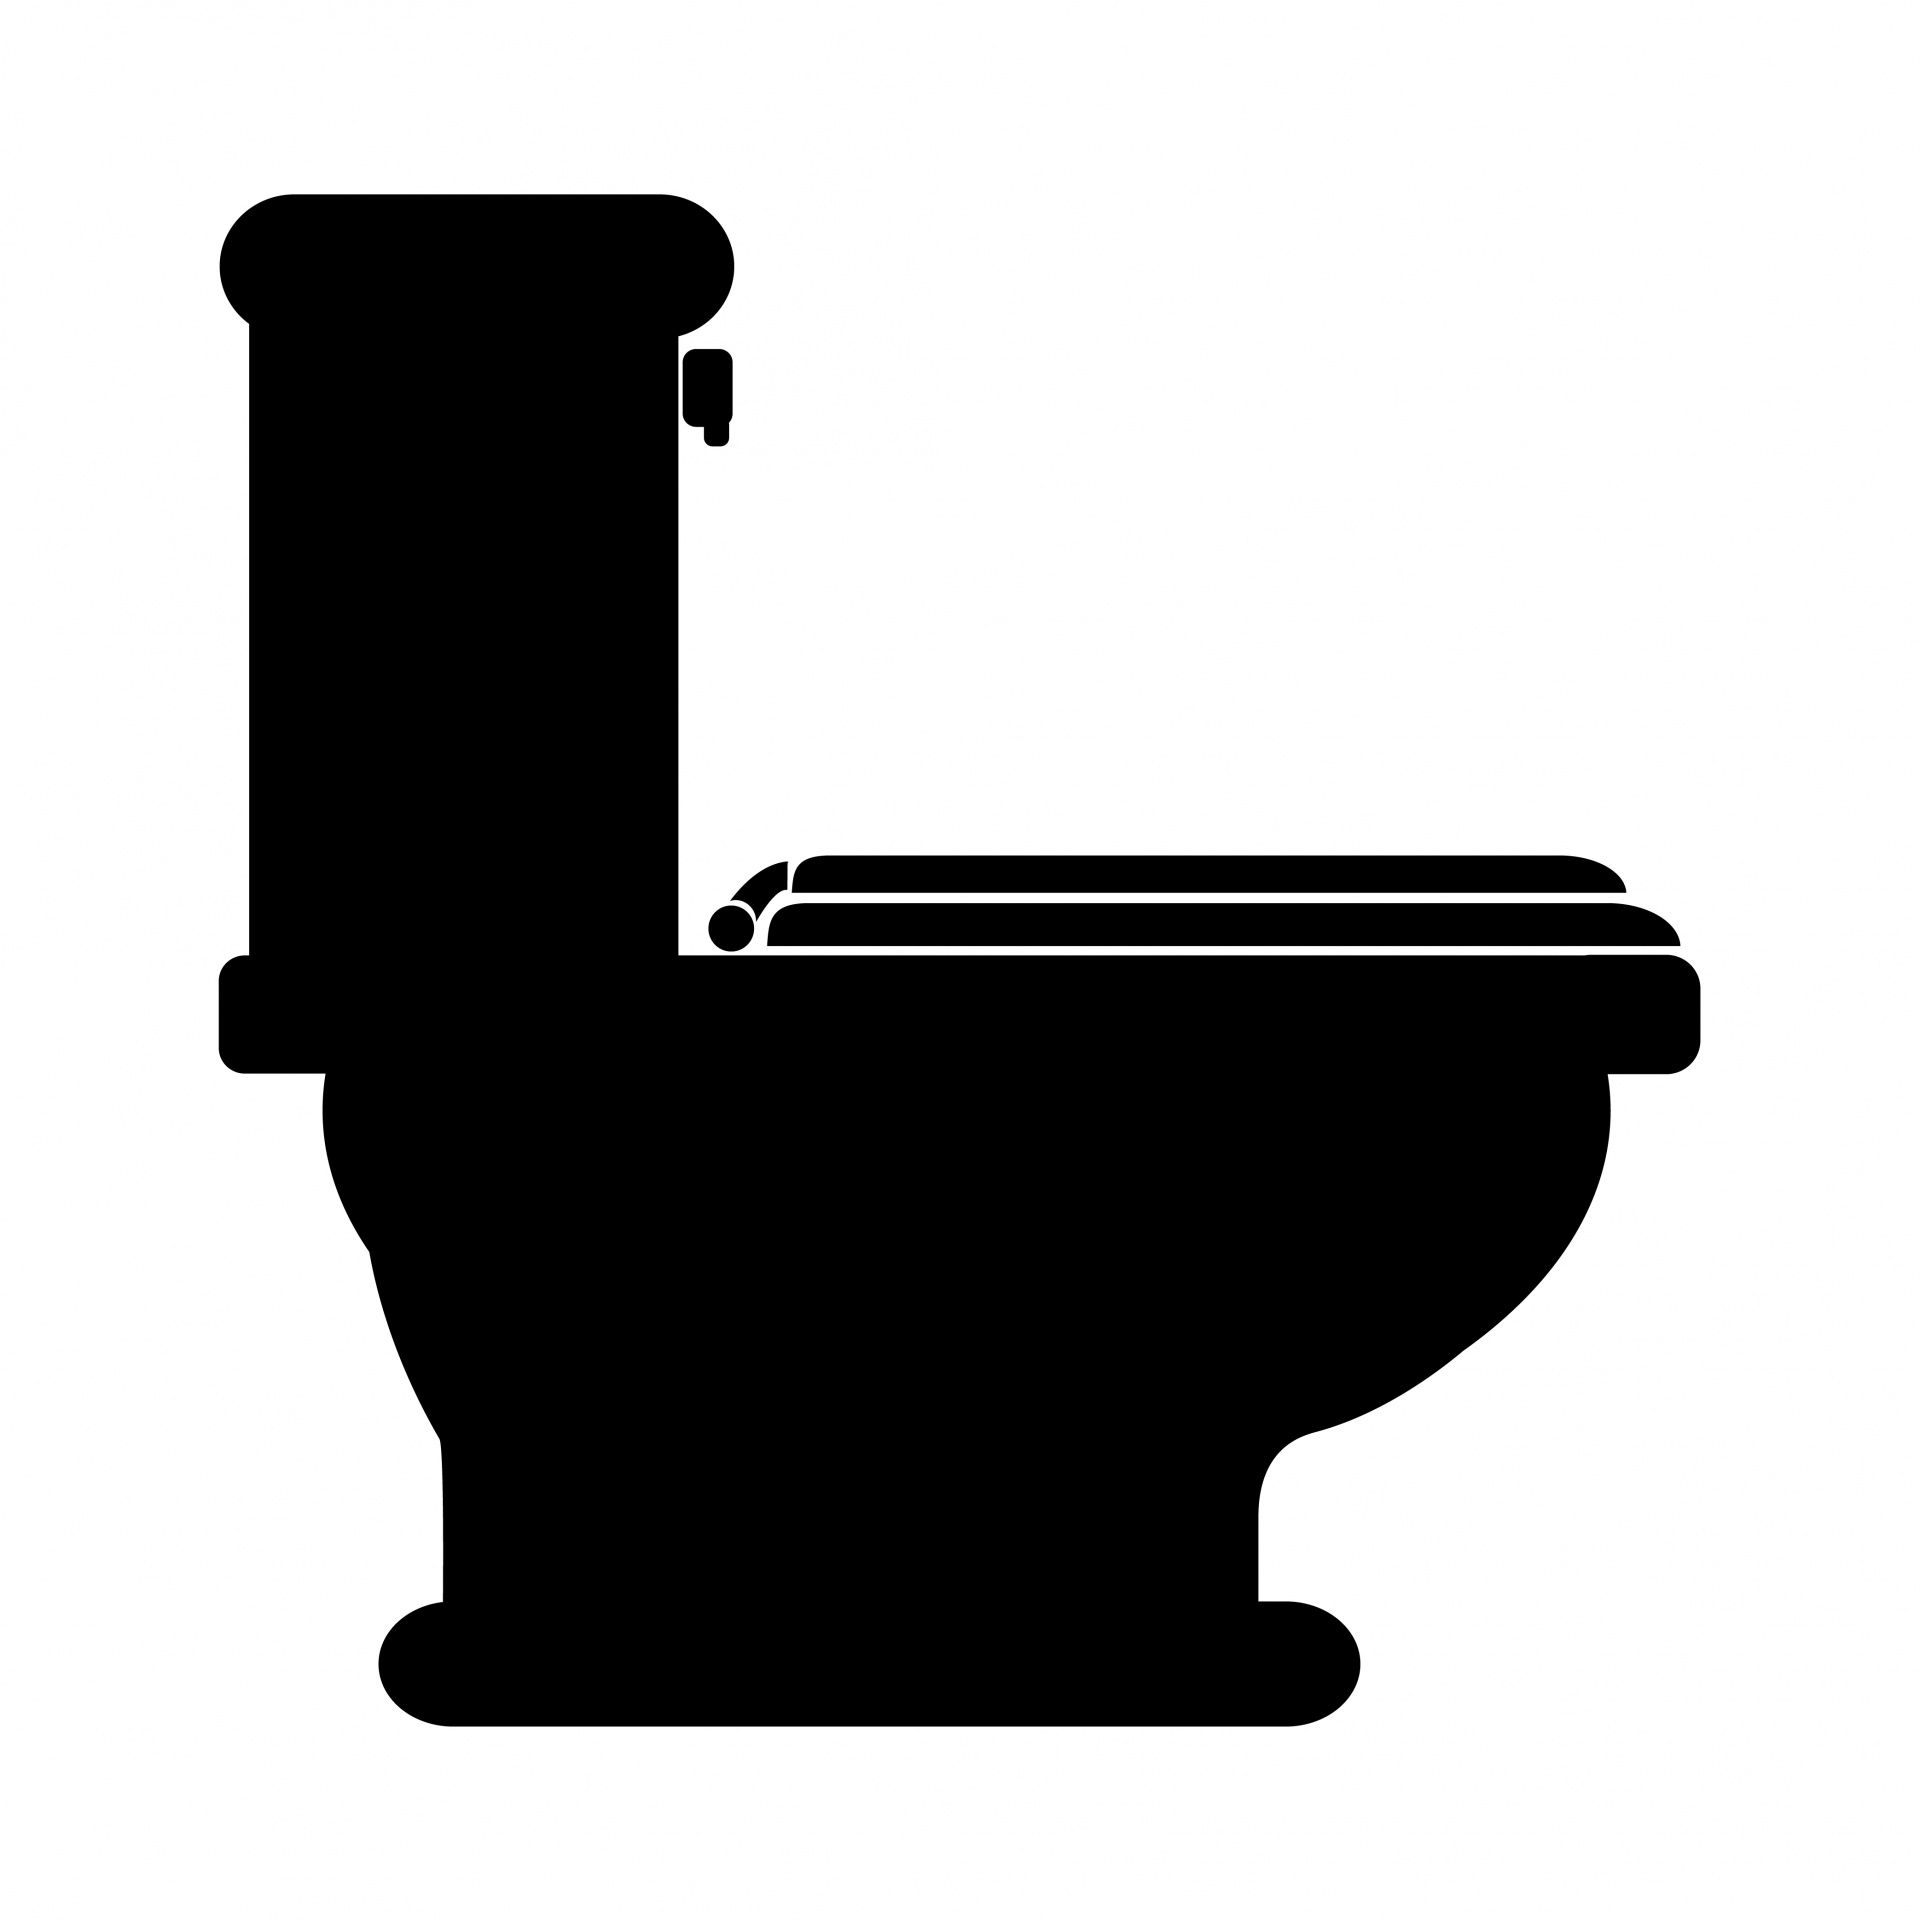 wc clipart vector - photo #33